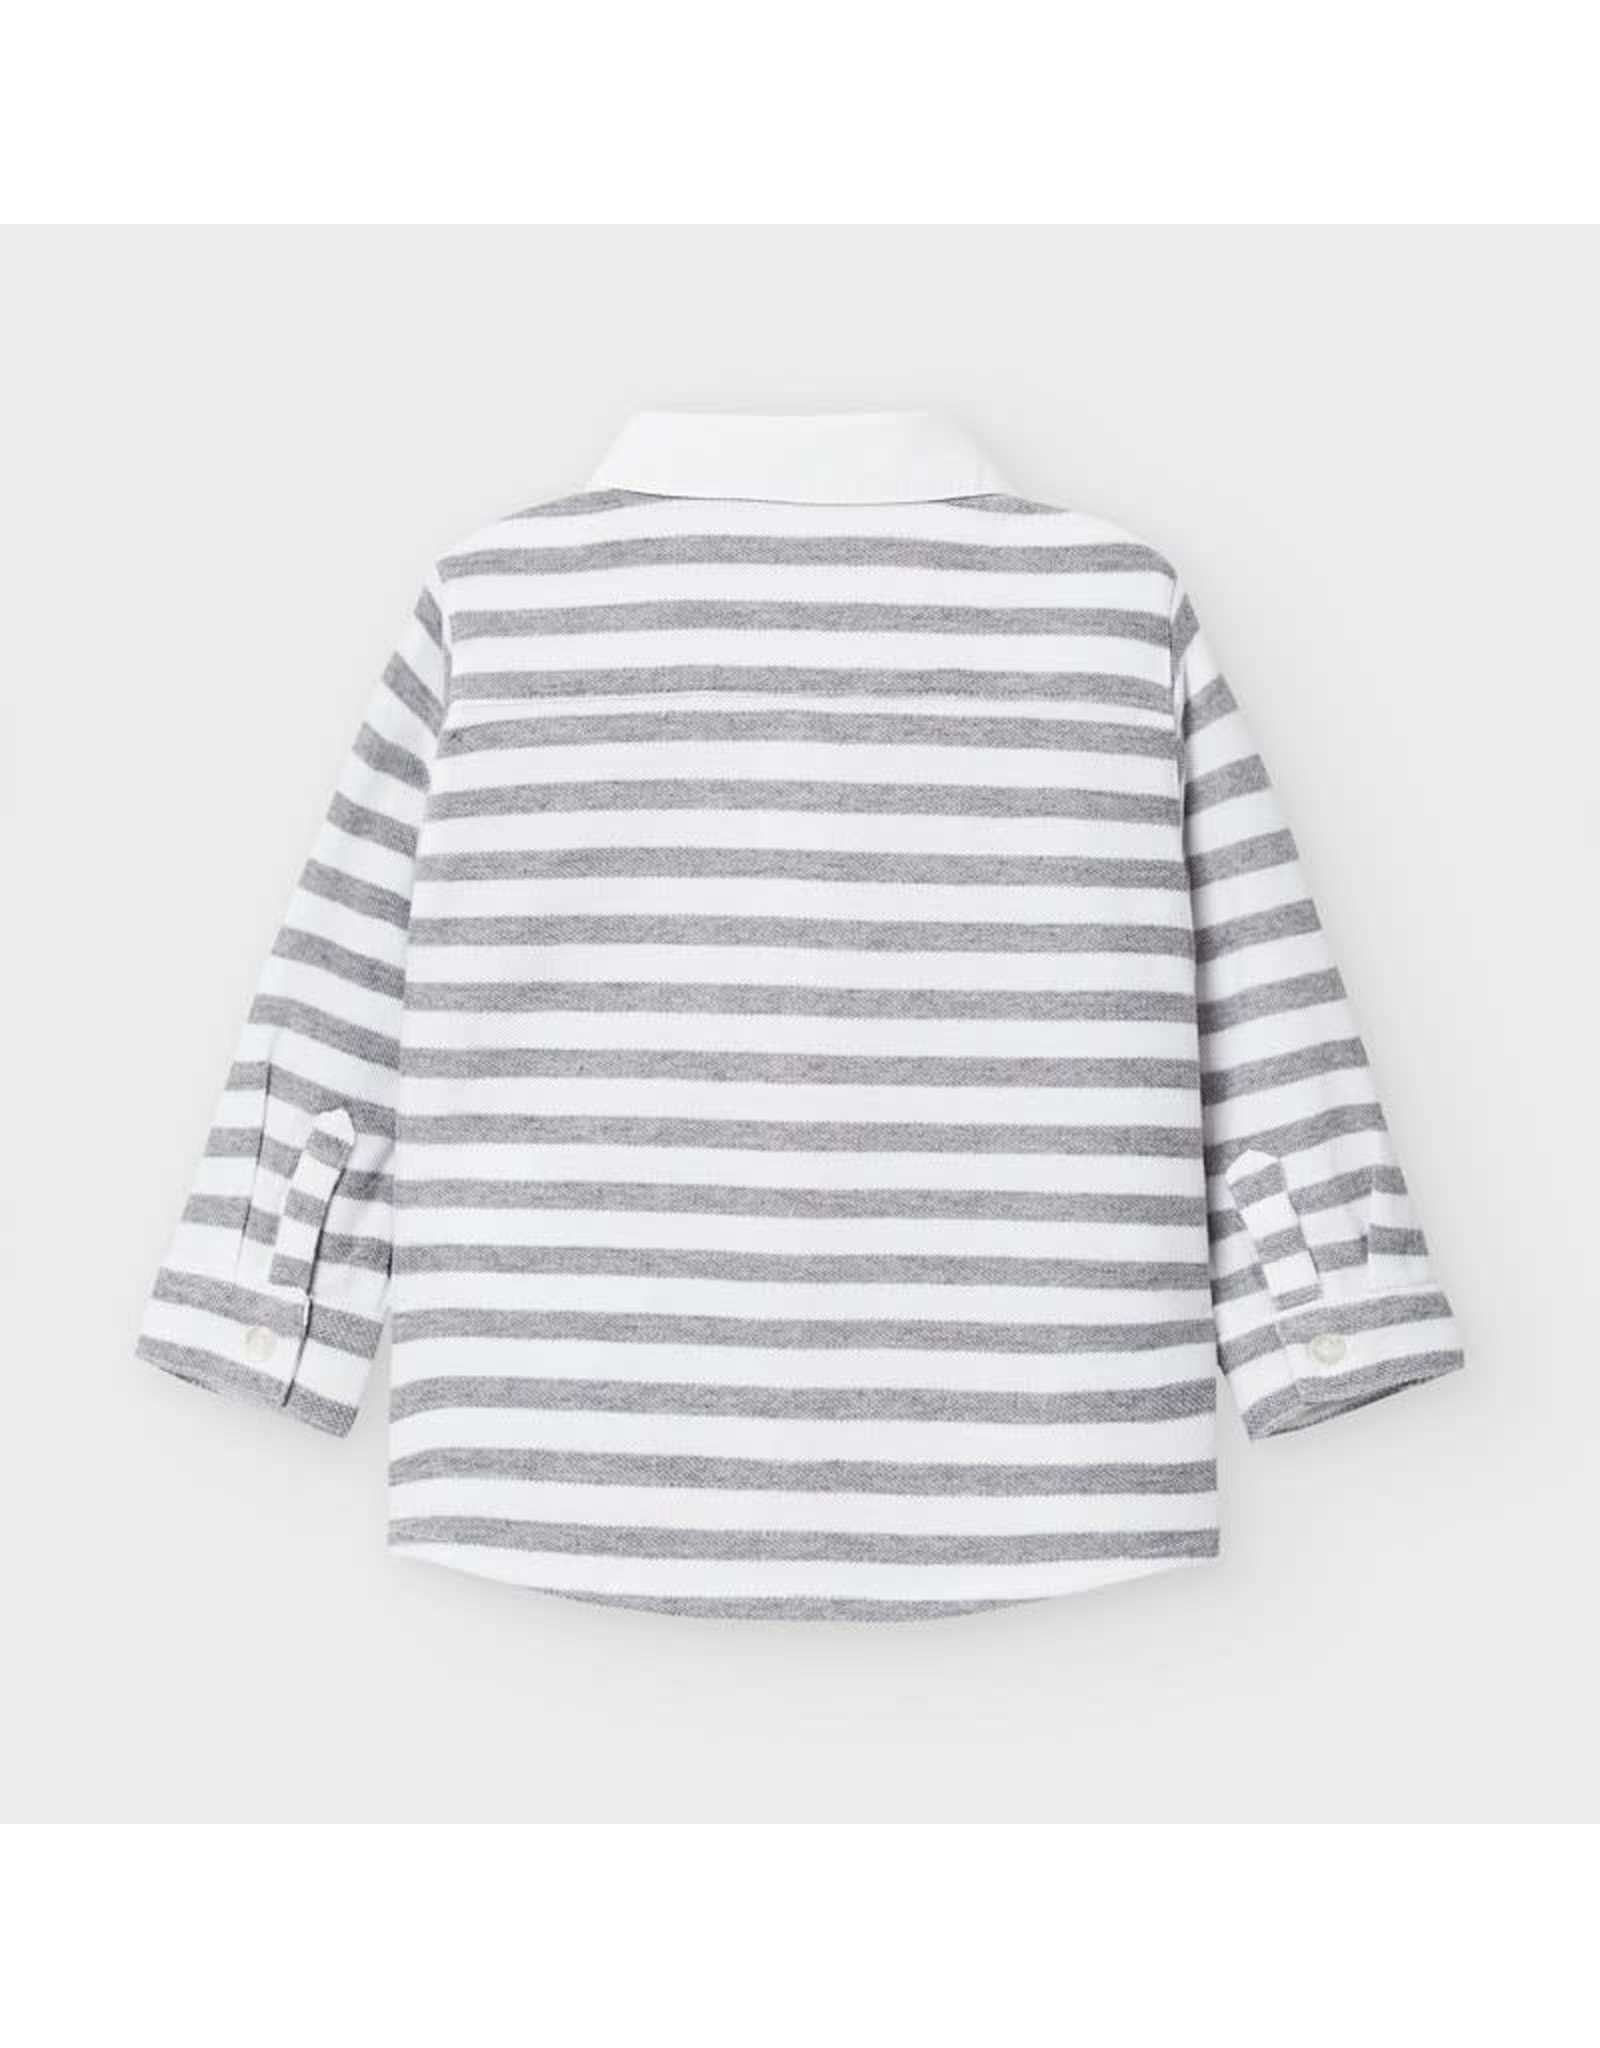 Mayoral Long Sleeve Stripe Button Up (9M)